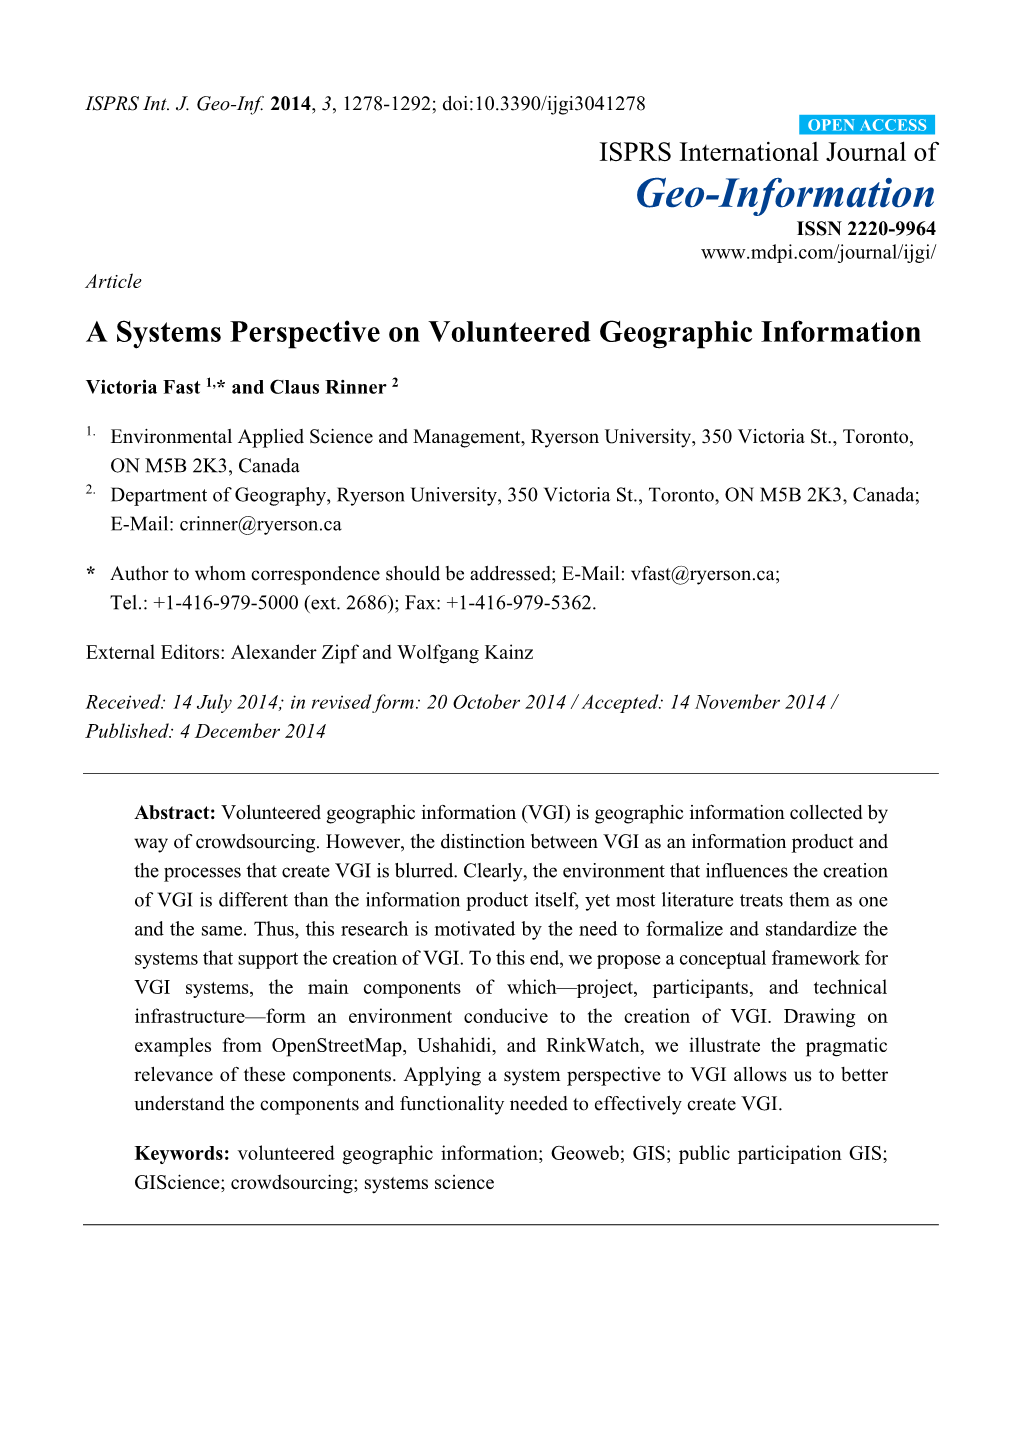 A Systems Perspective on Volunteered Geographic Information